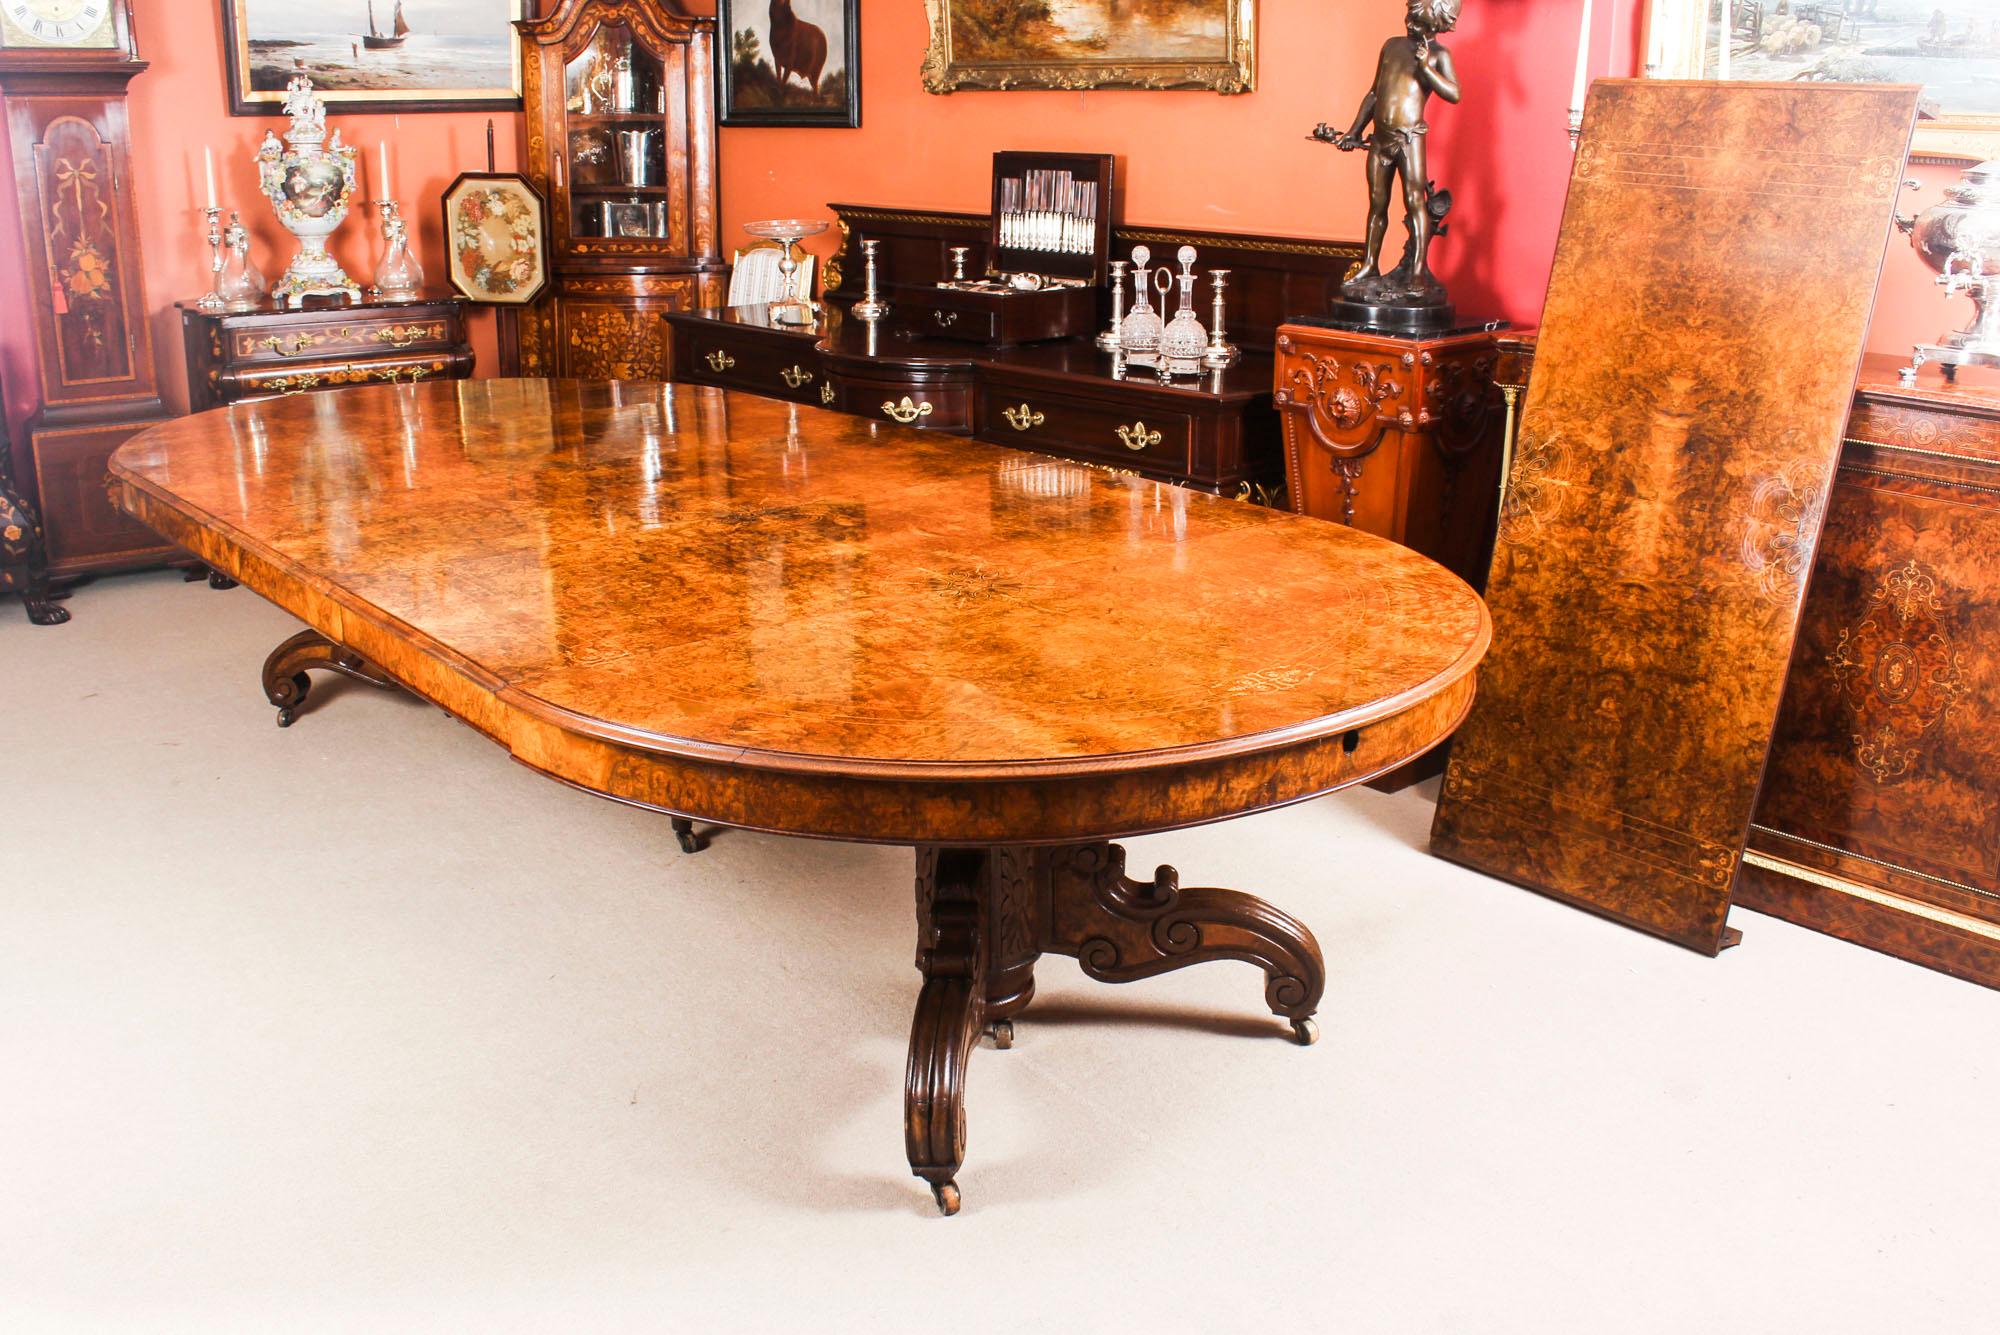 English Antique Victorian Burr Marquetry Walnut Dining Table 19th Century and 14 Chairs